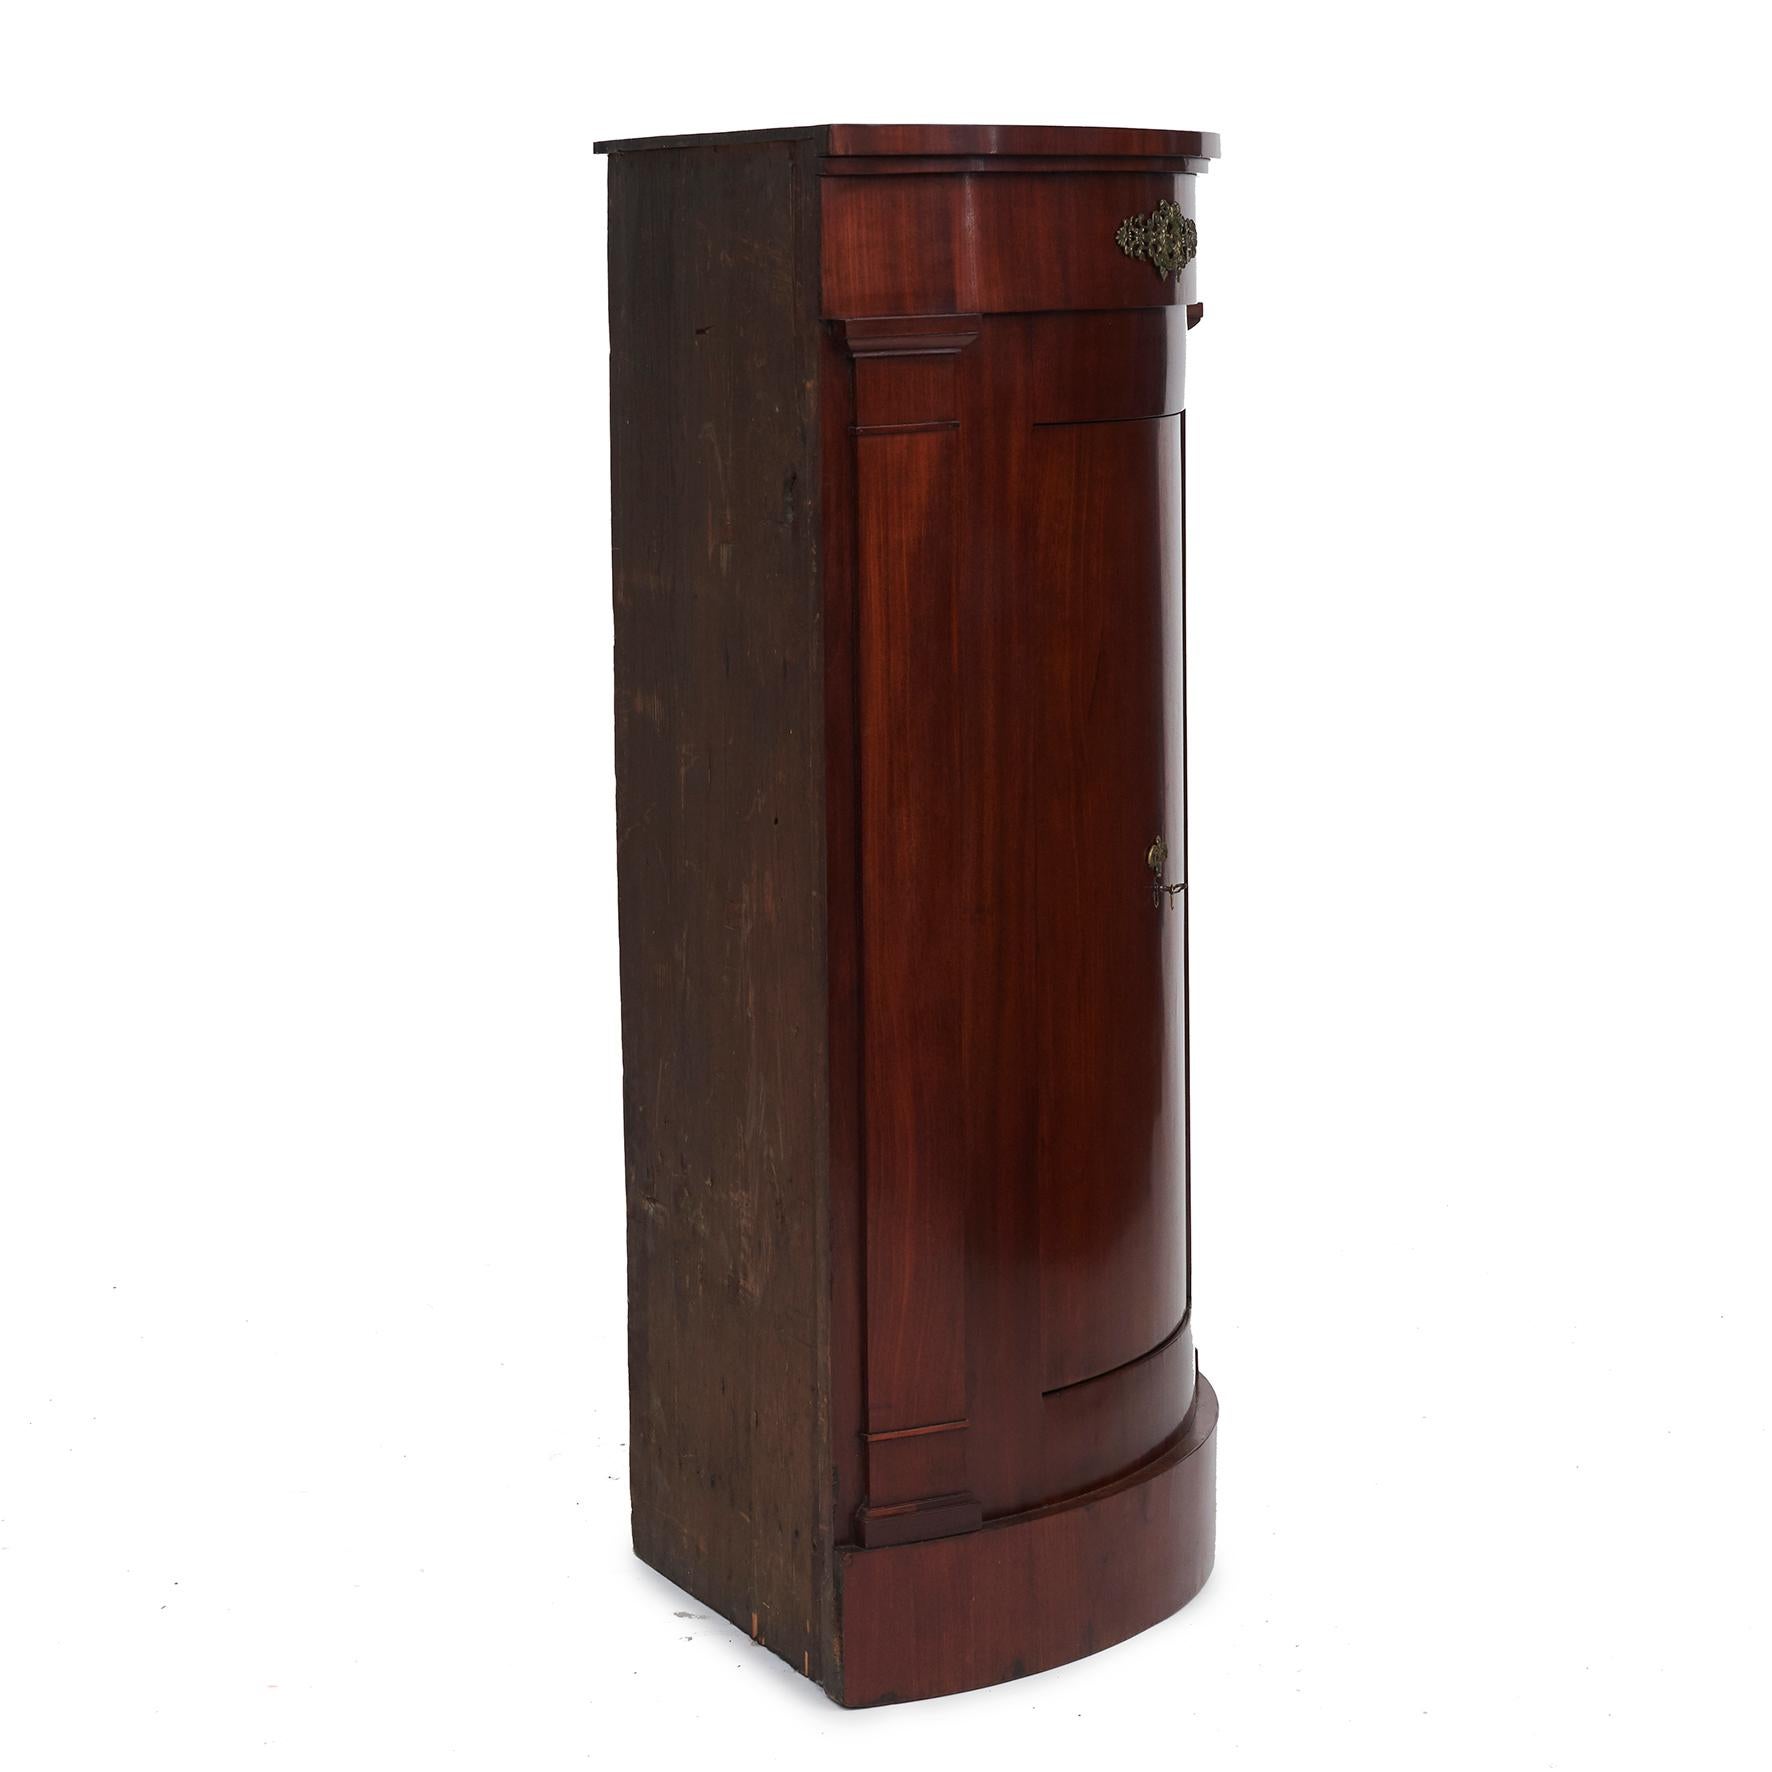 Danish empire bow fronted corner cabinet in flame mahogany.
Bow front with a single door, dressed with brass lock in the middle, flanked by flat coloums with capitals.
Original brass lock and key.
Interior arranged with a trio of useful